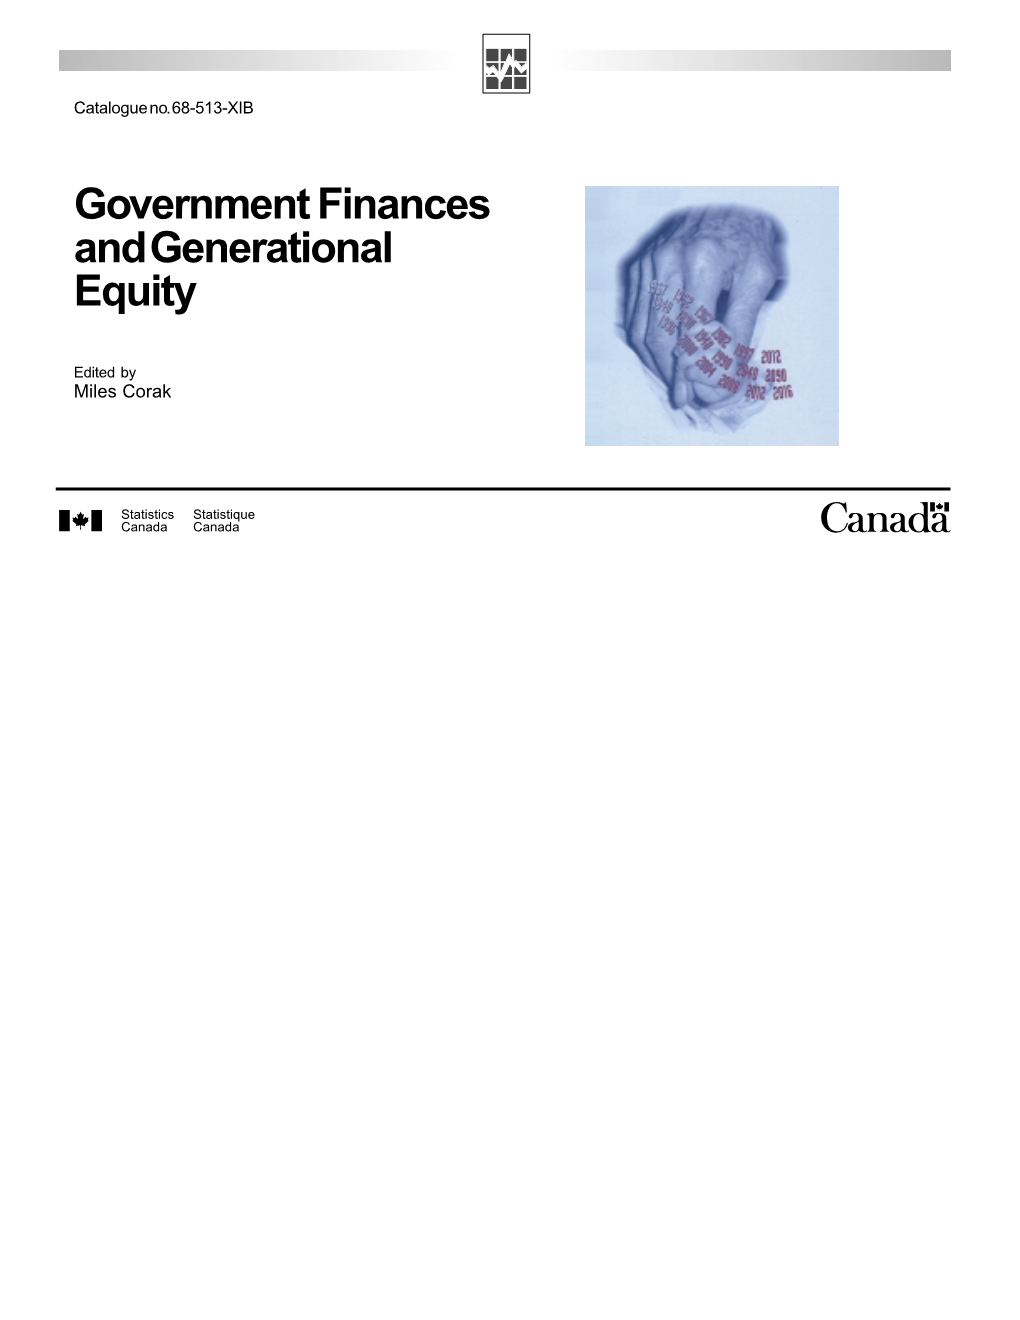 Government Finances and Generational Equity